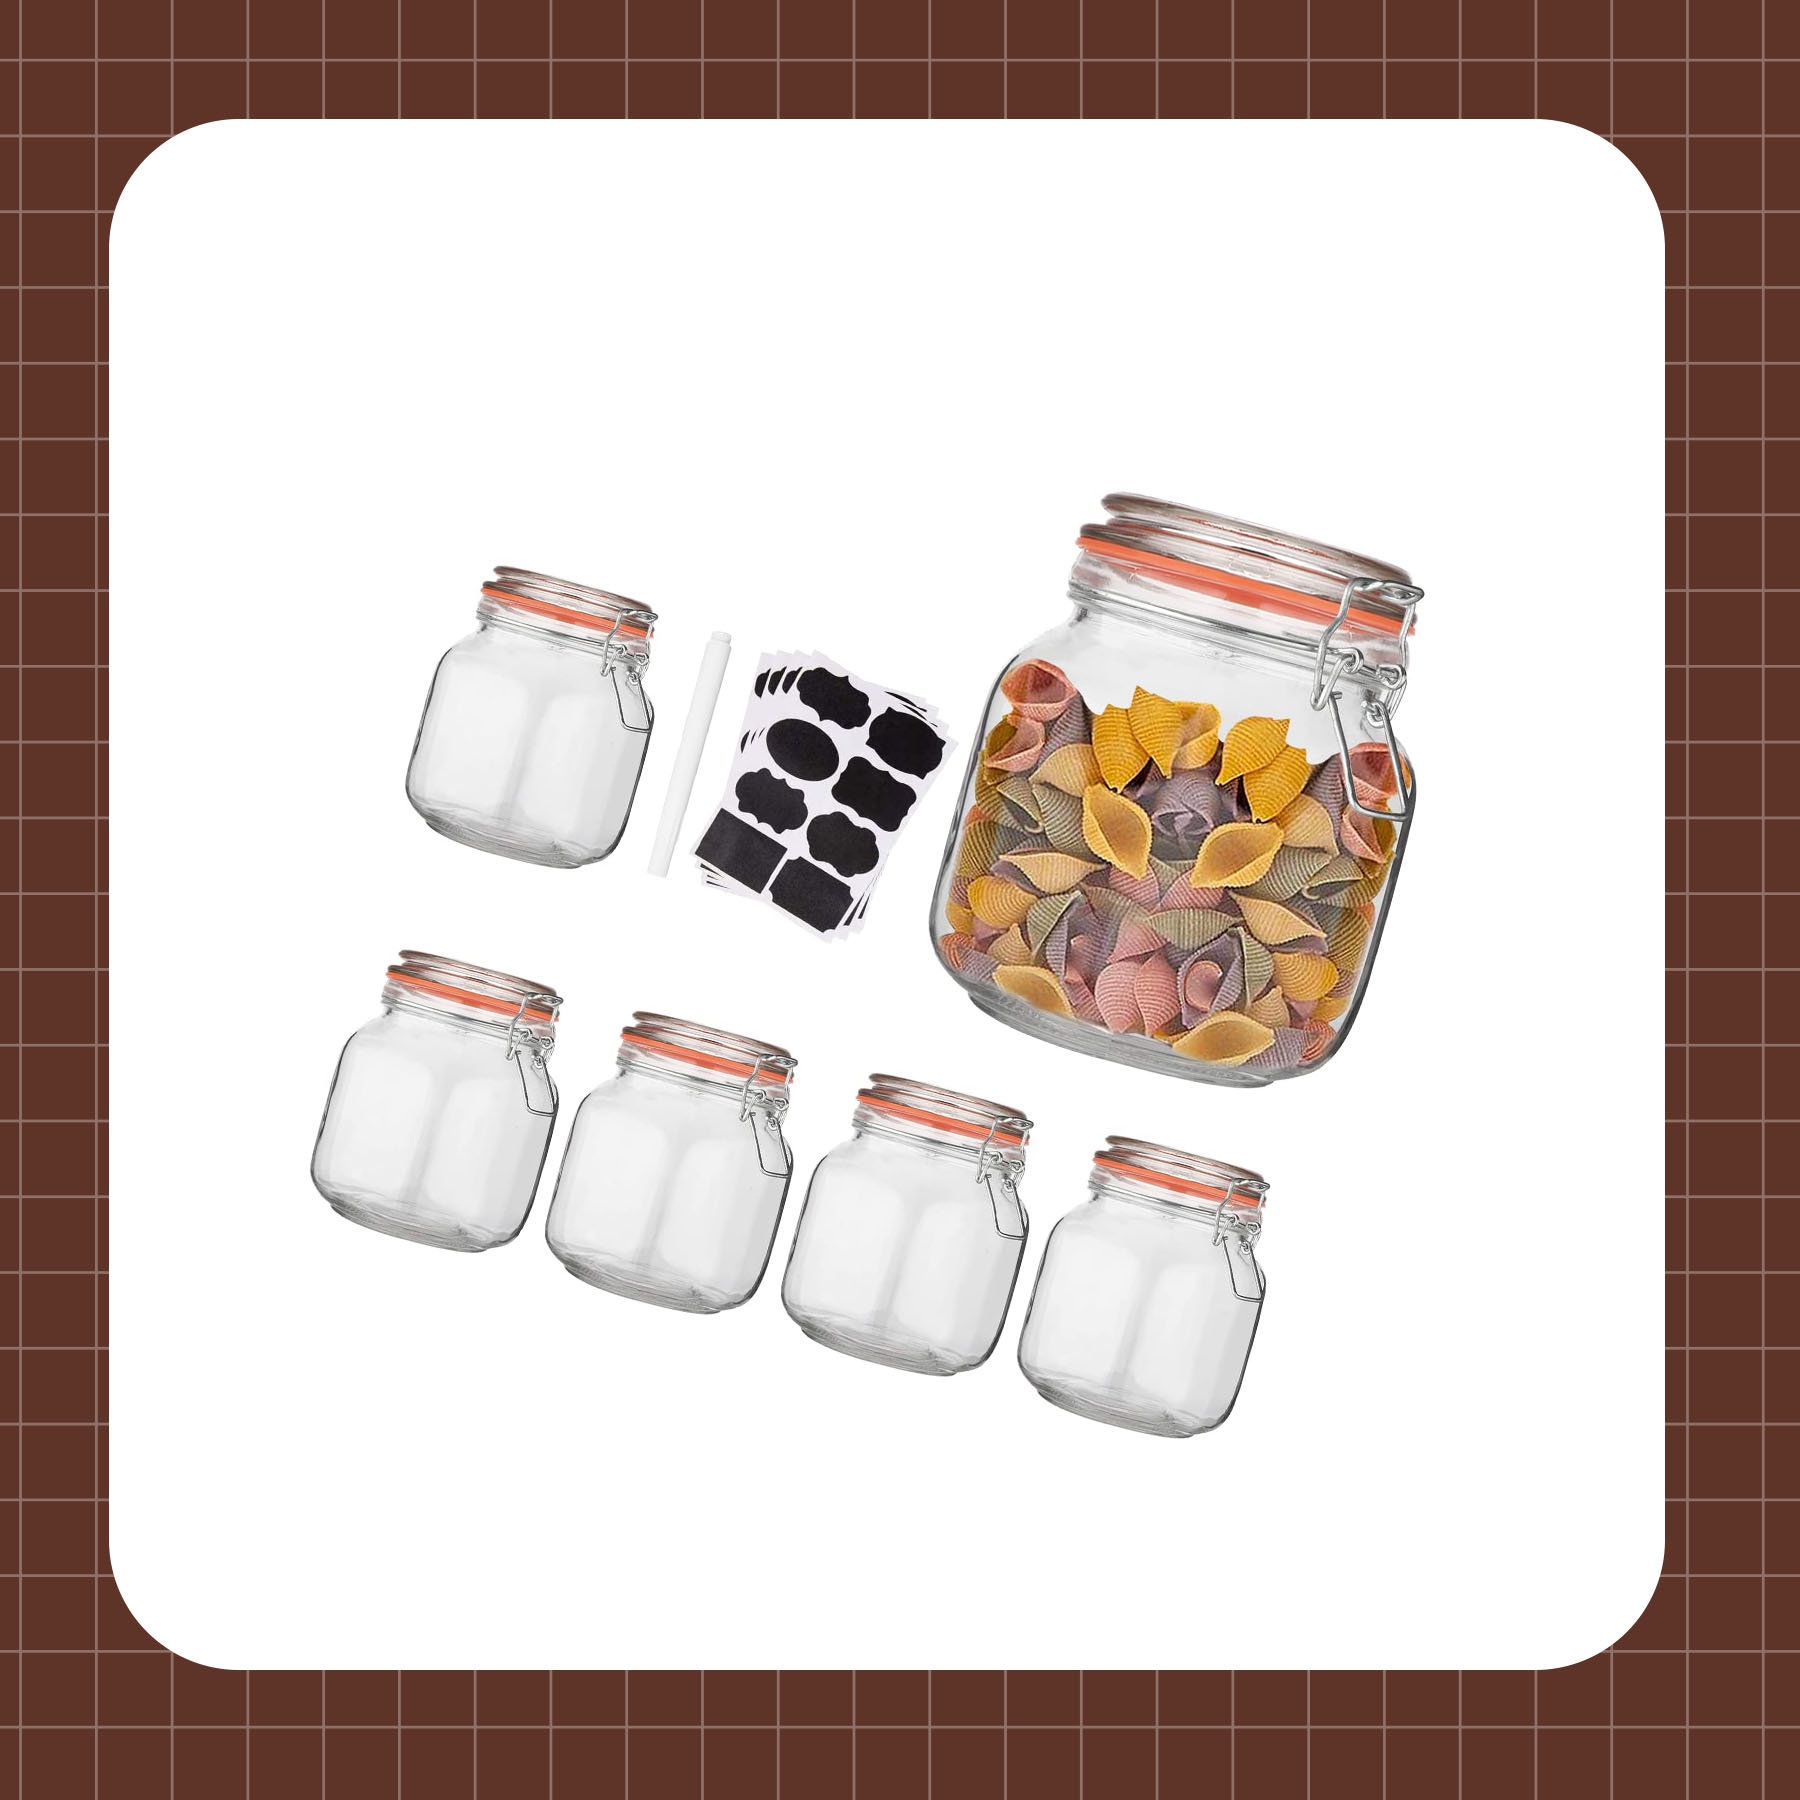 34oz Glass Jars with Airtight Lids, Wide with Leak Proof Rubber